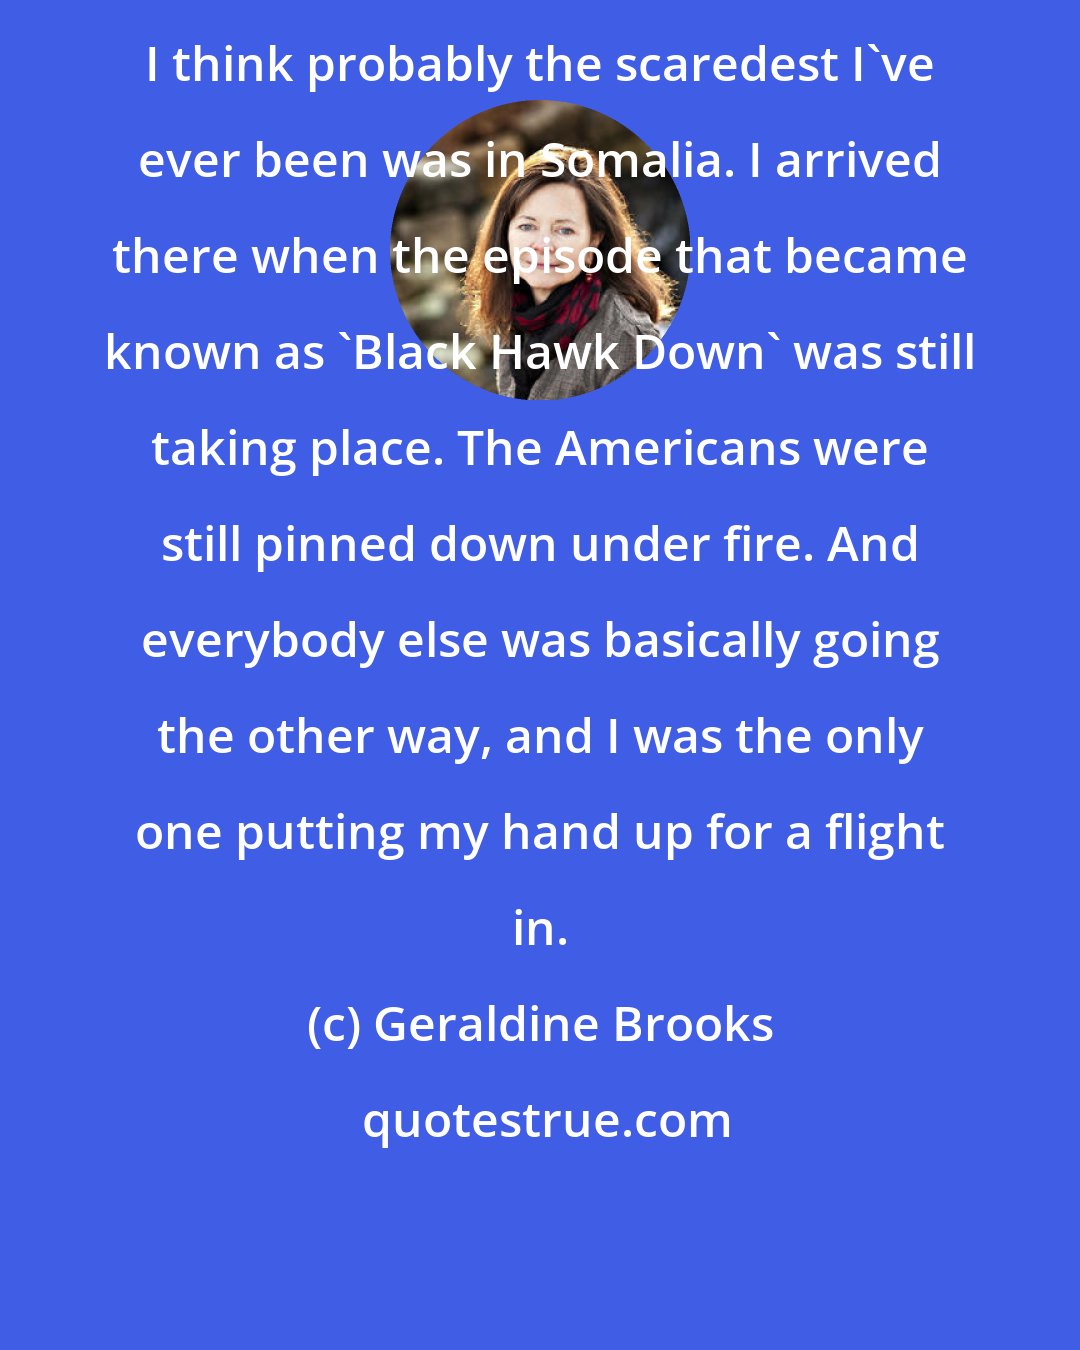 Geraldine Brooks: I think probably the scaredest I've ever been was in Somalia. I arrived there when the episode that became known as 'Black Hawk Down' was still taking place. The Americans were still pinned down under fire. And everybody else was basically going the other way, and I was the only one putting my hand up for a flight in.